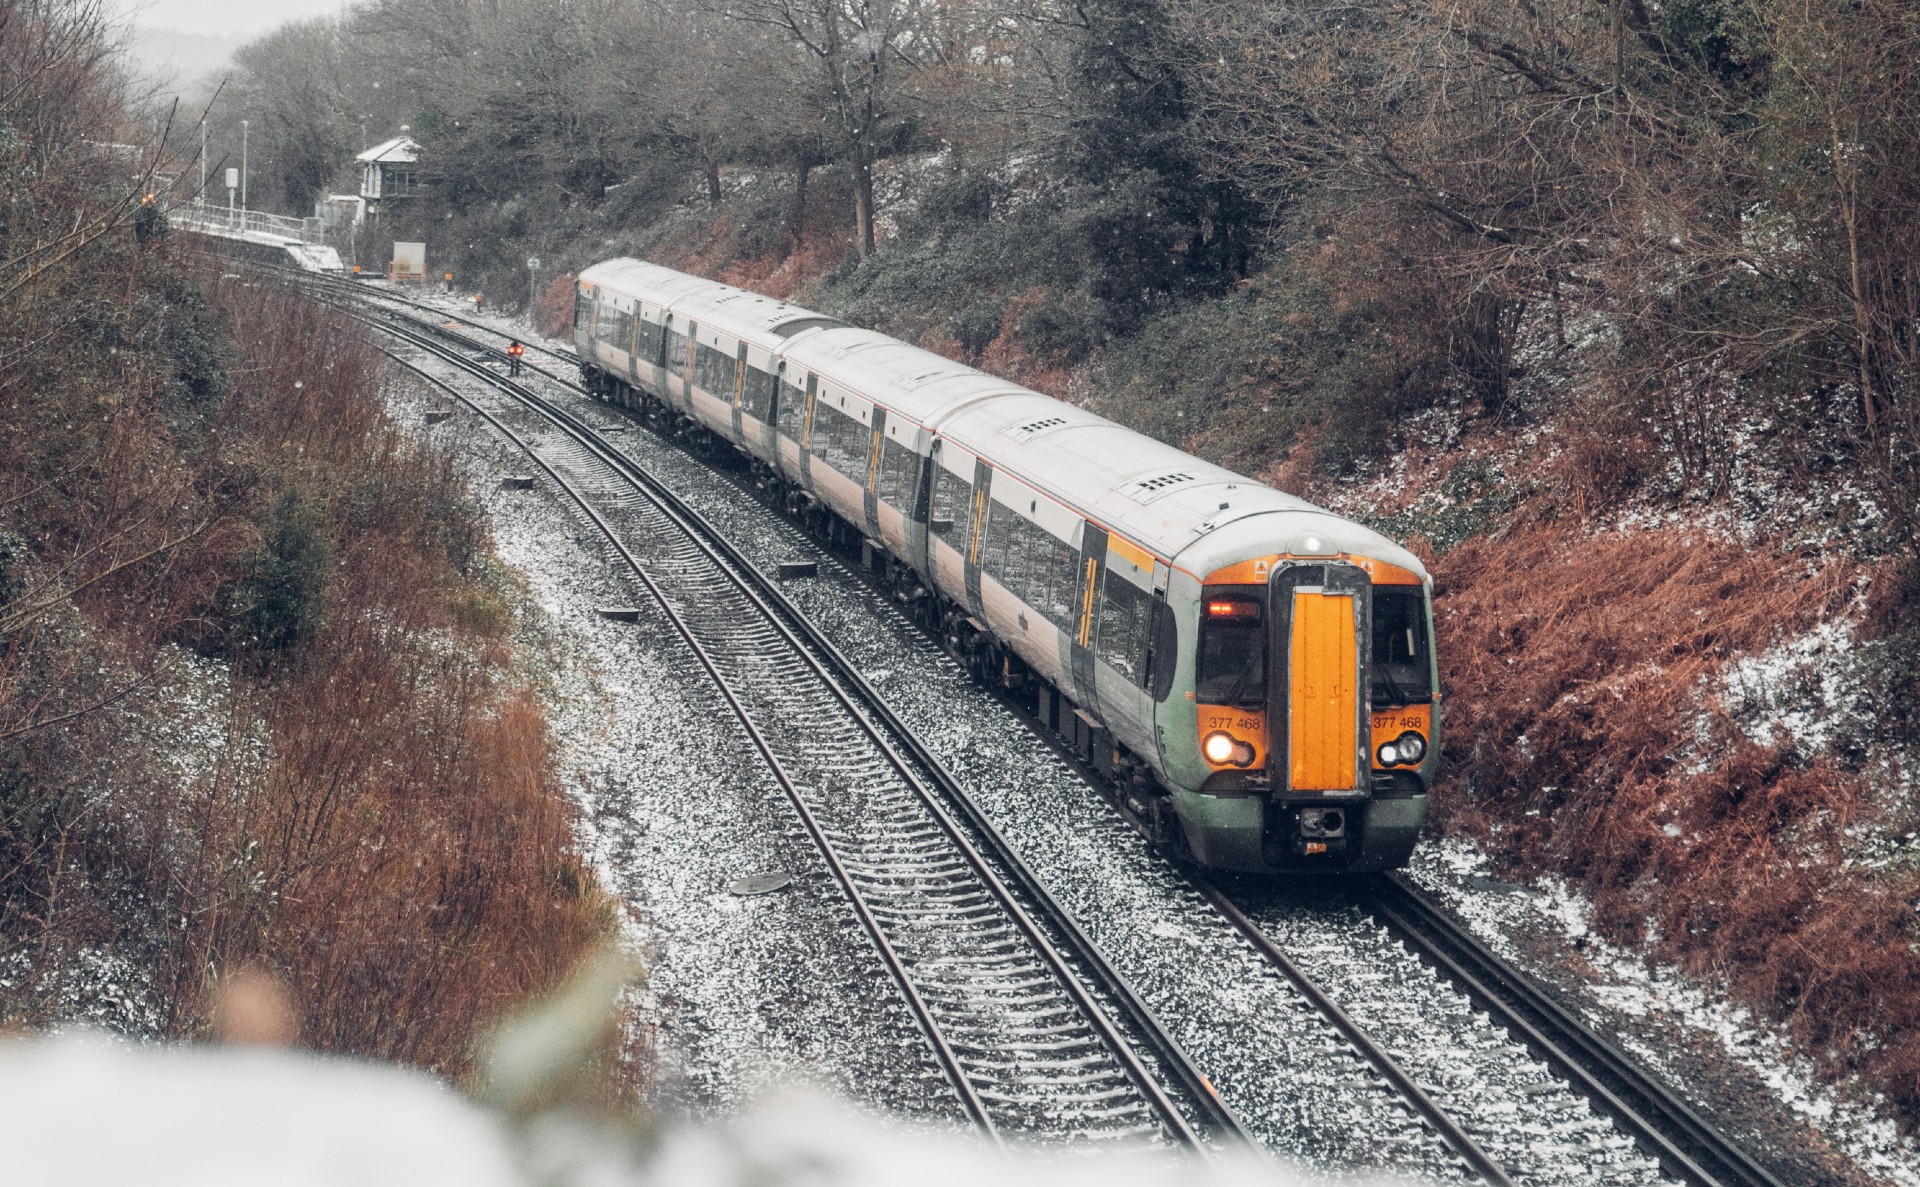  train standing on a snowy track